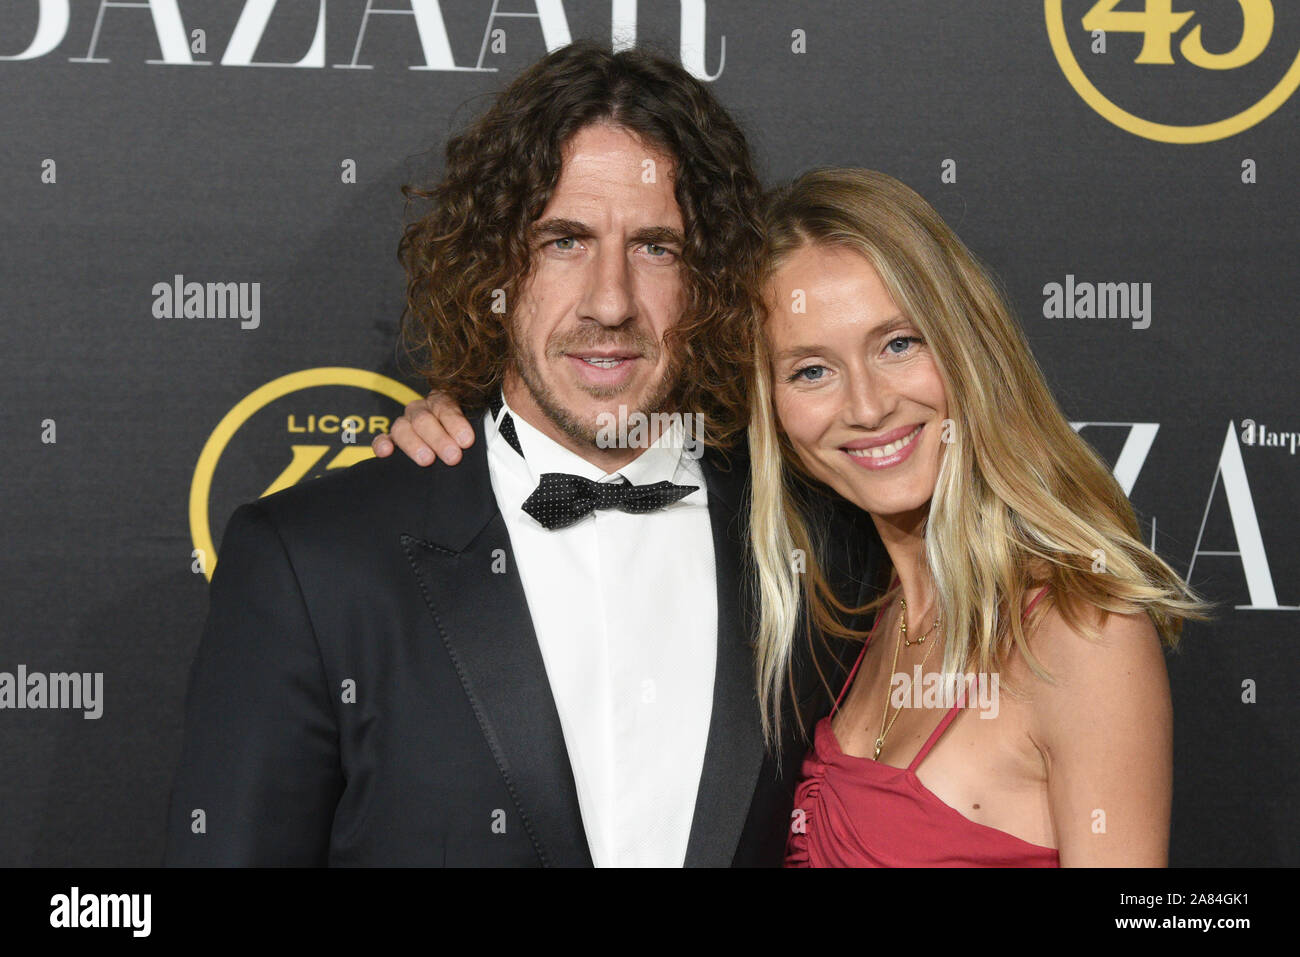 Carles Puyol (L) and Vanesa Lorenzo attend the Harper's Bazaar Awards at Santoña palace in Madrid. Stock Photo